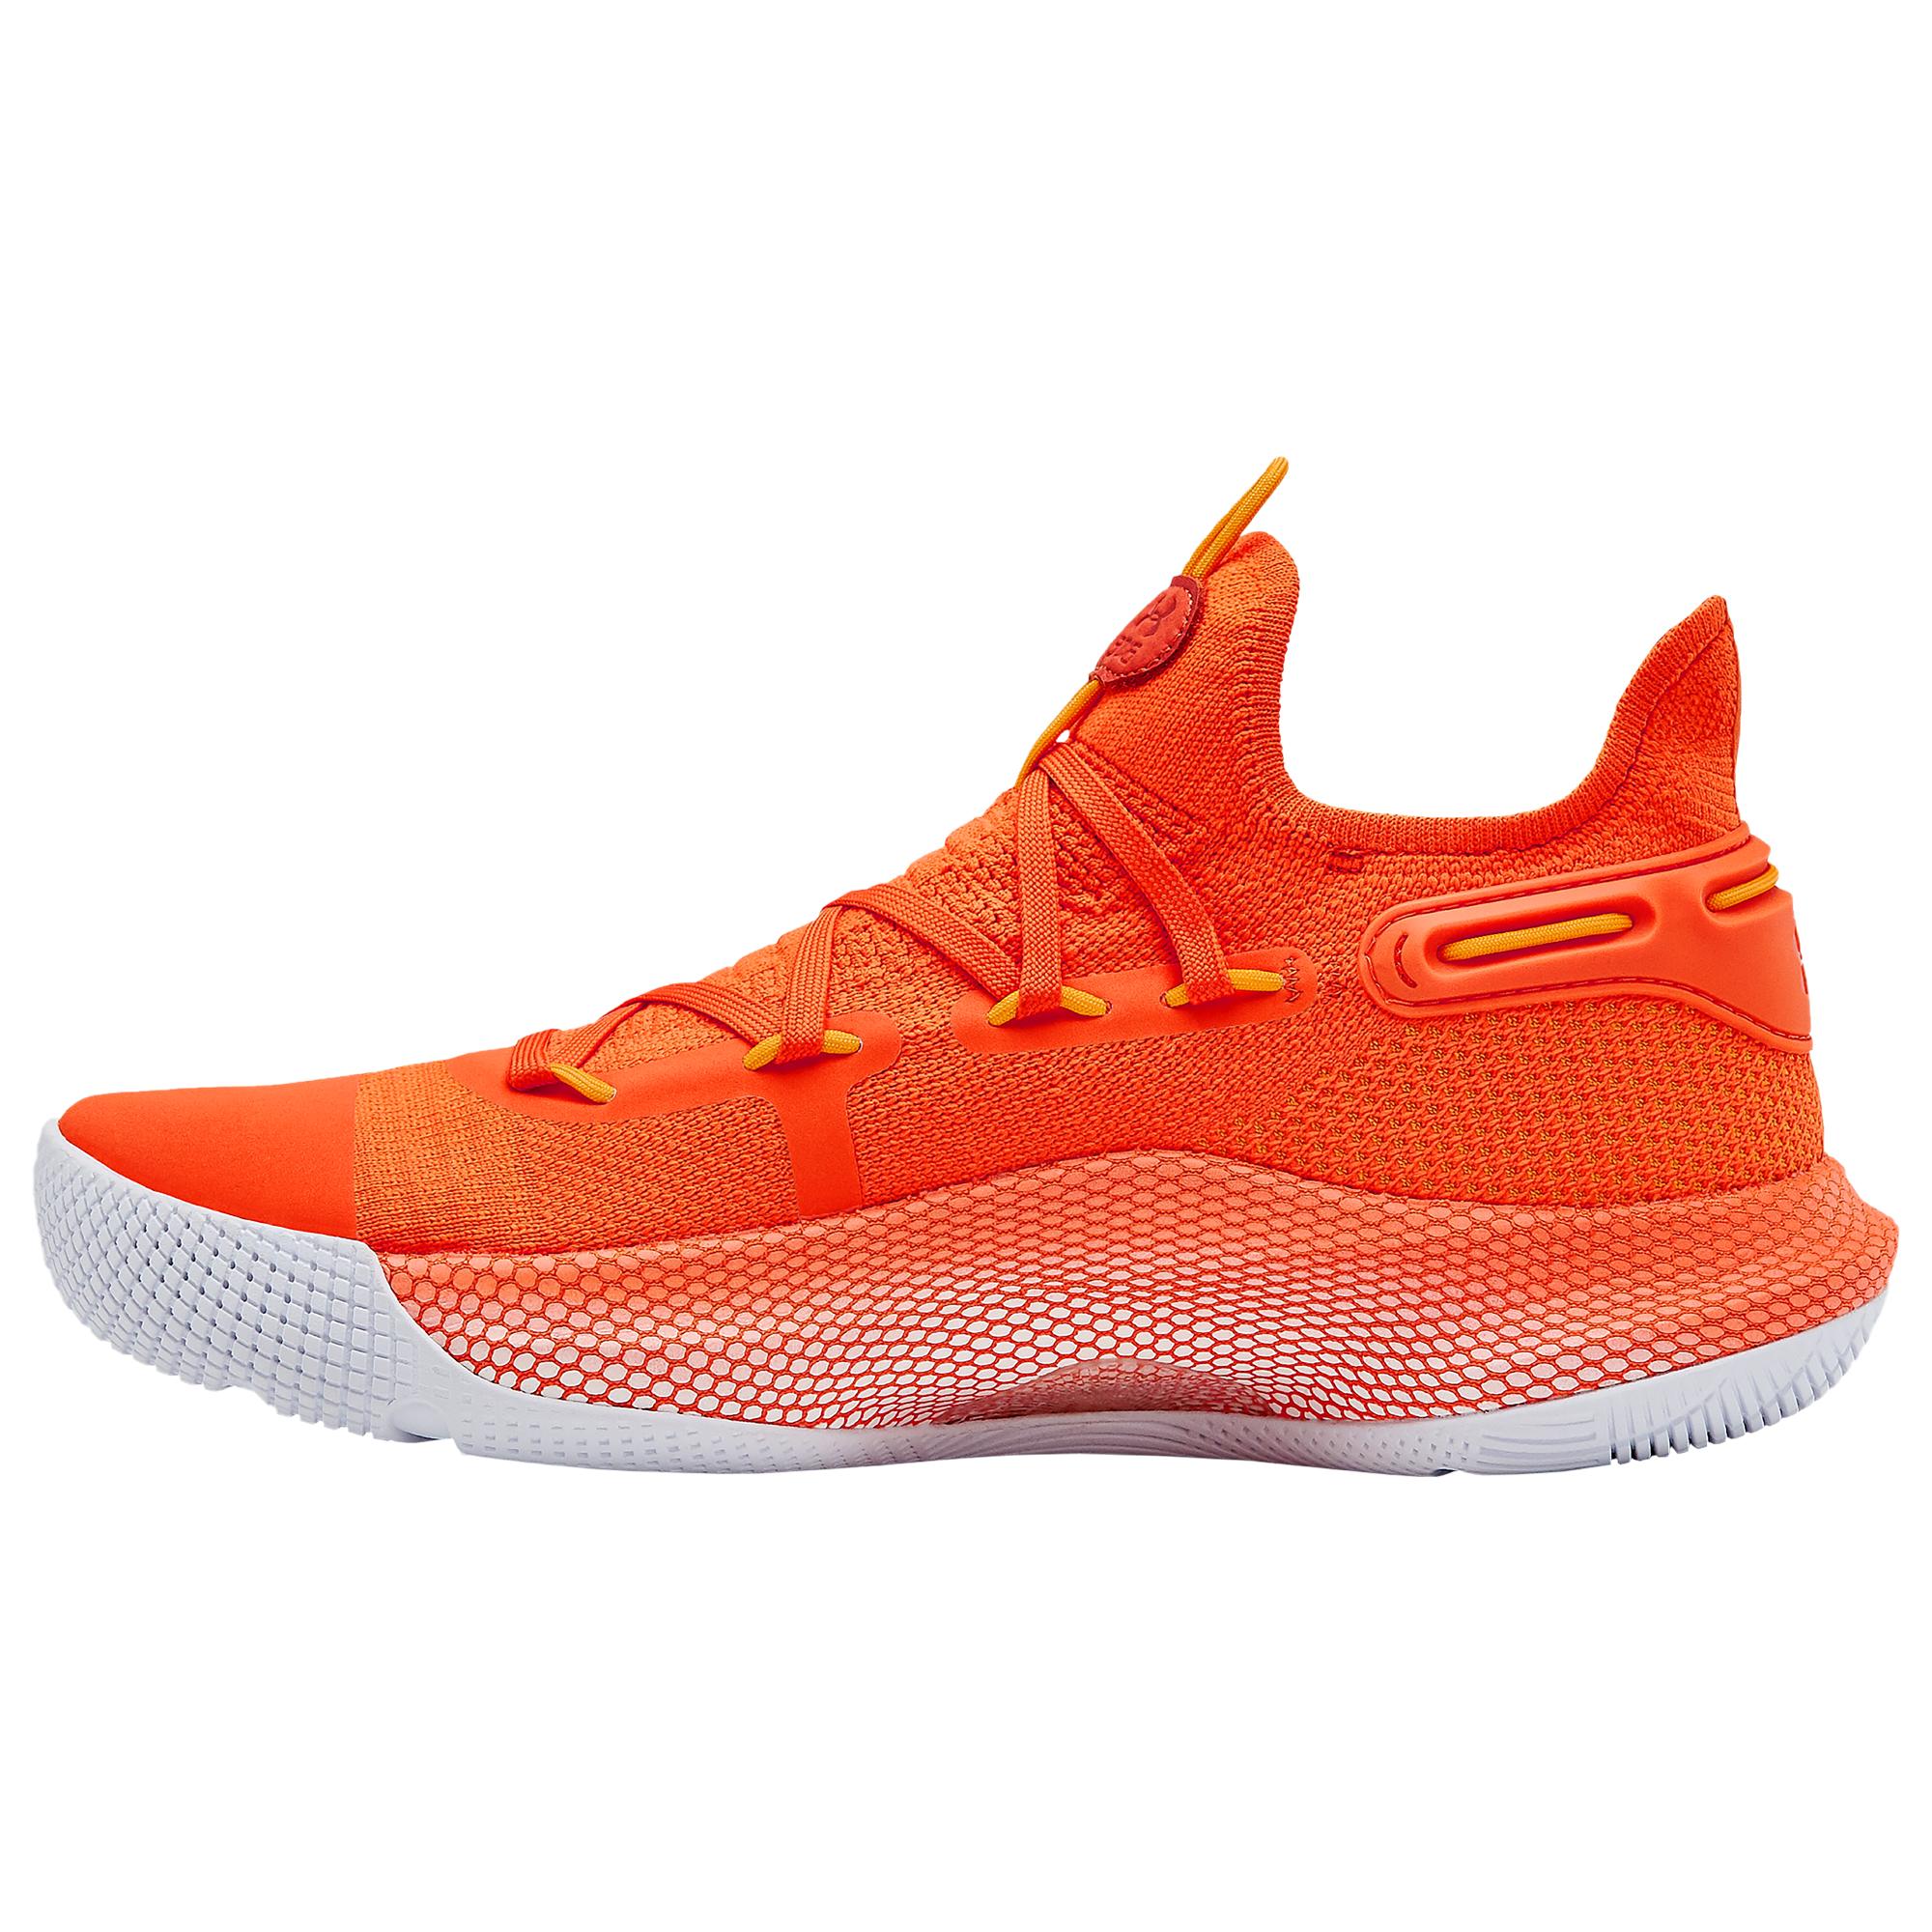 Under Armour Rubber Curry 6 Basketball Shoes in Orange for